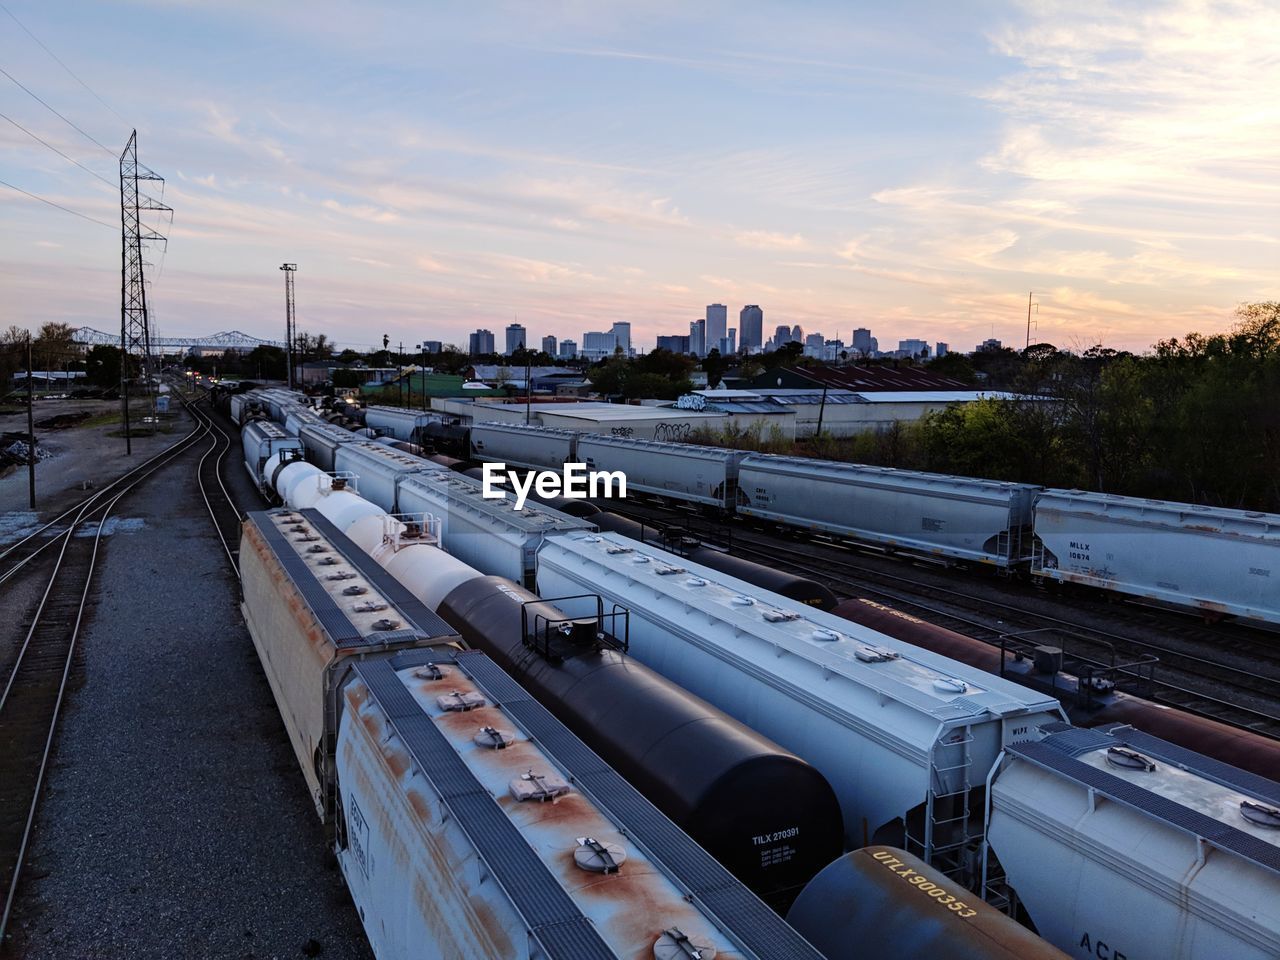 Trains on railroad tracks against sky during sunset